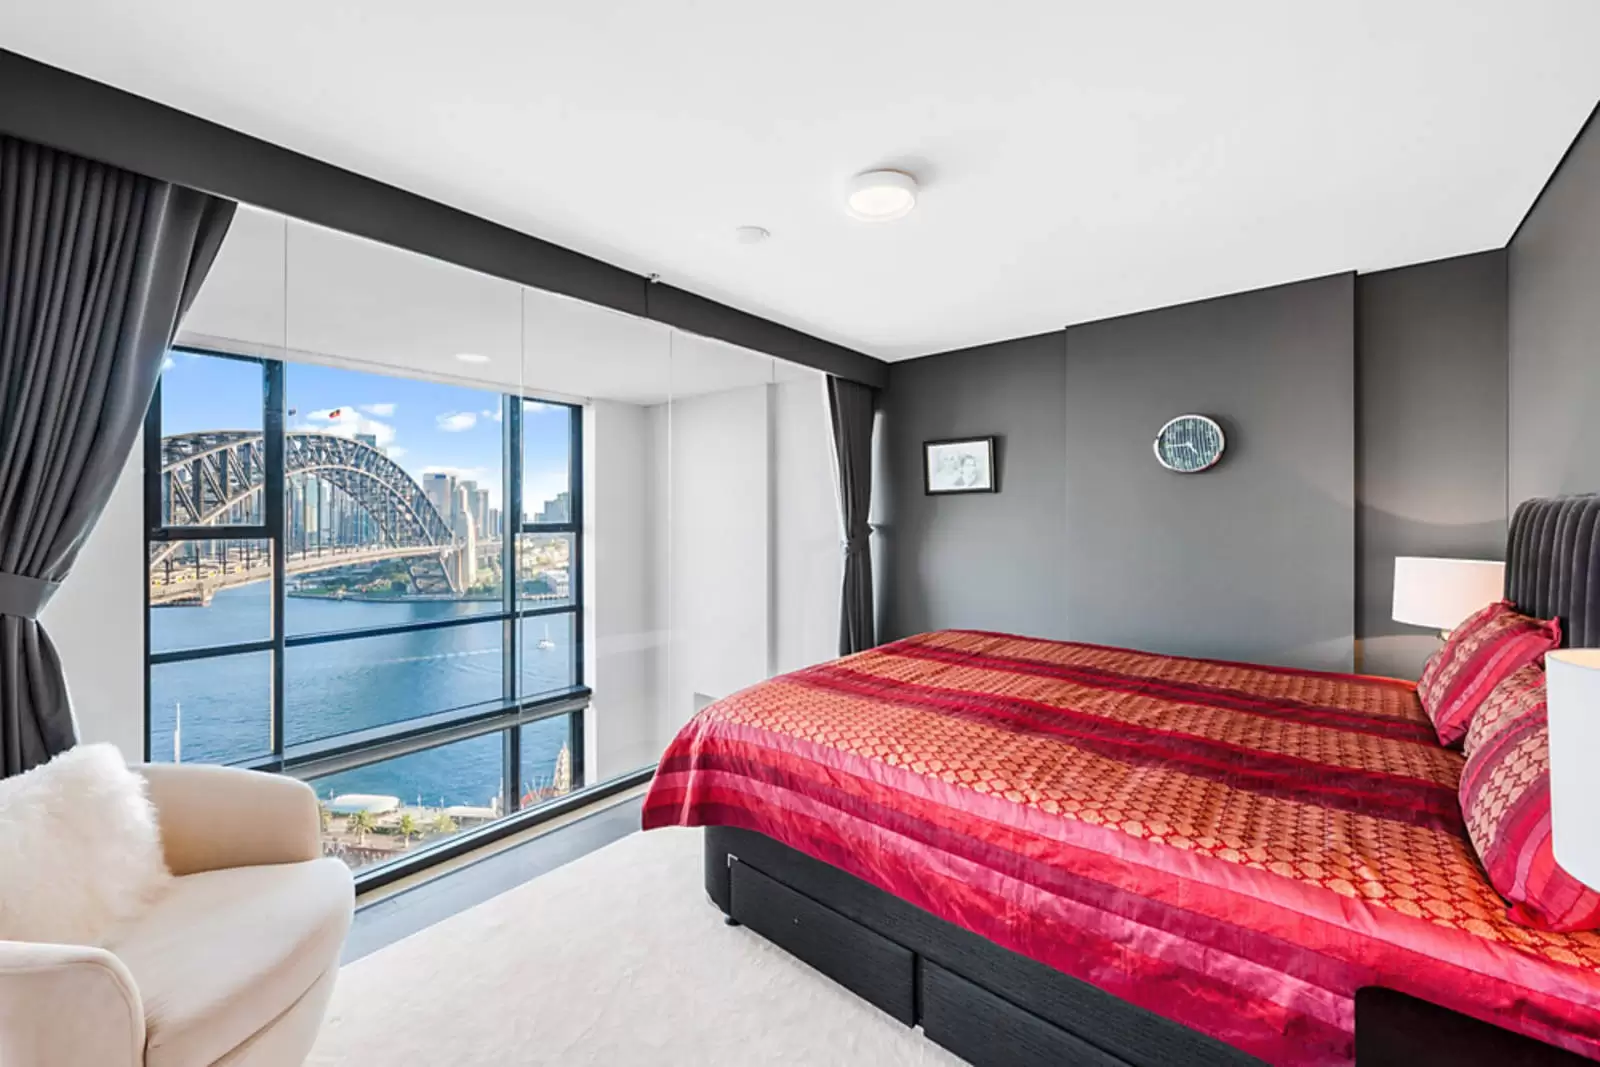 Photo #12: 1906/2 Dind Street, Milsons Point - Leased by Sydney Sotheby's International Realty